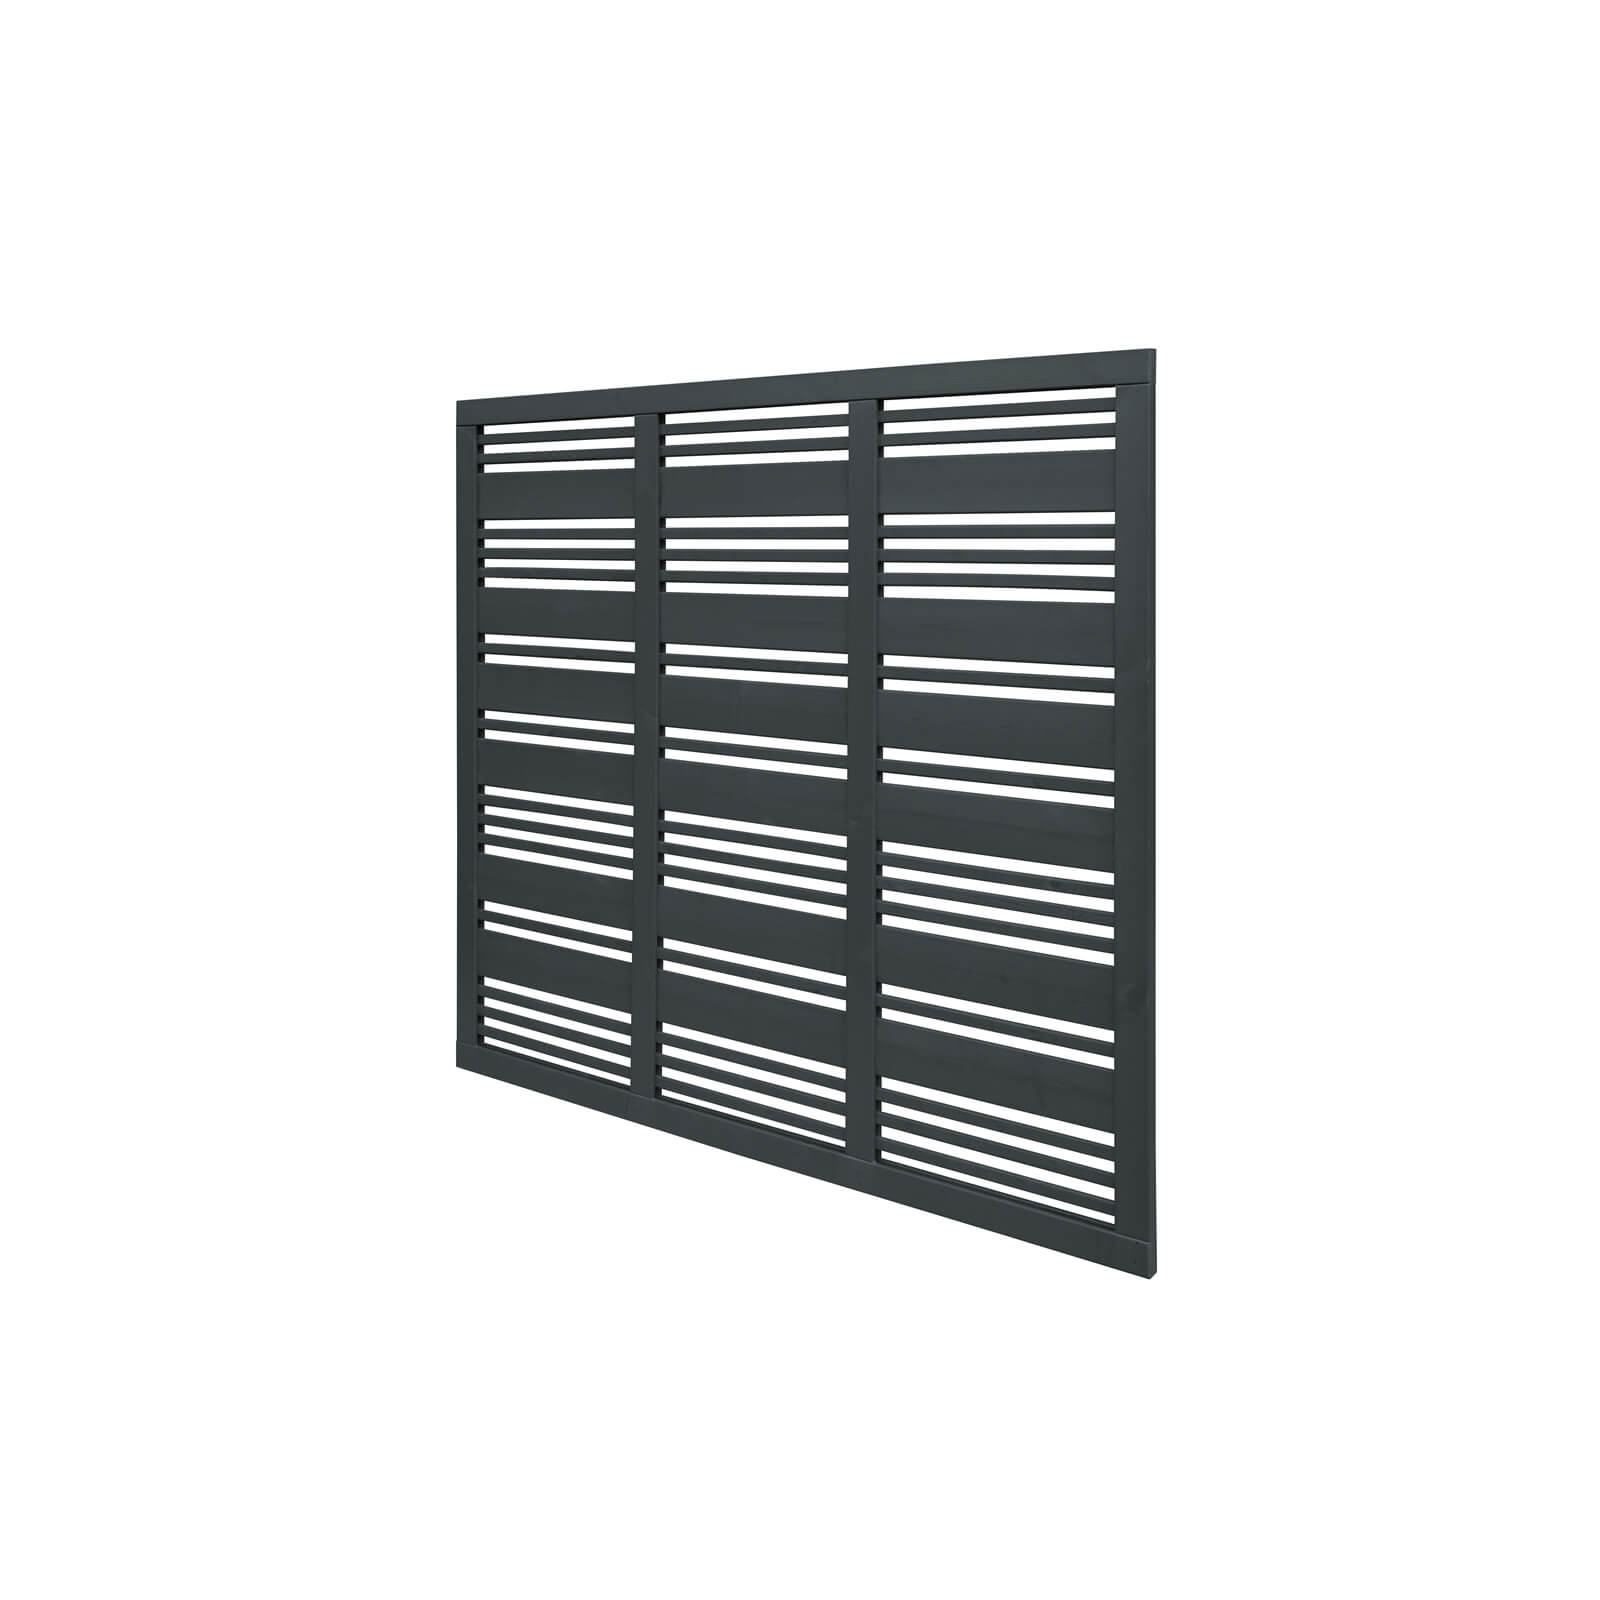 6ft x 6ft (1.8m x 1.8m) Grey Painted Contemporary Mix Slatted Fence Panel - Pack of 4